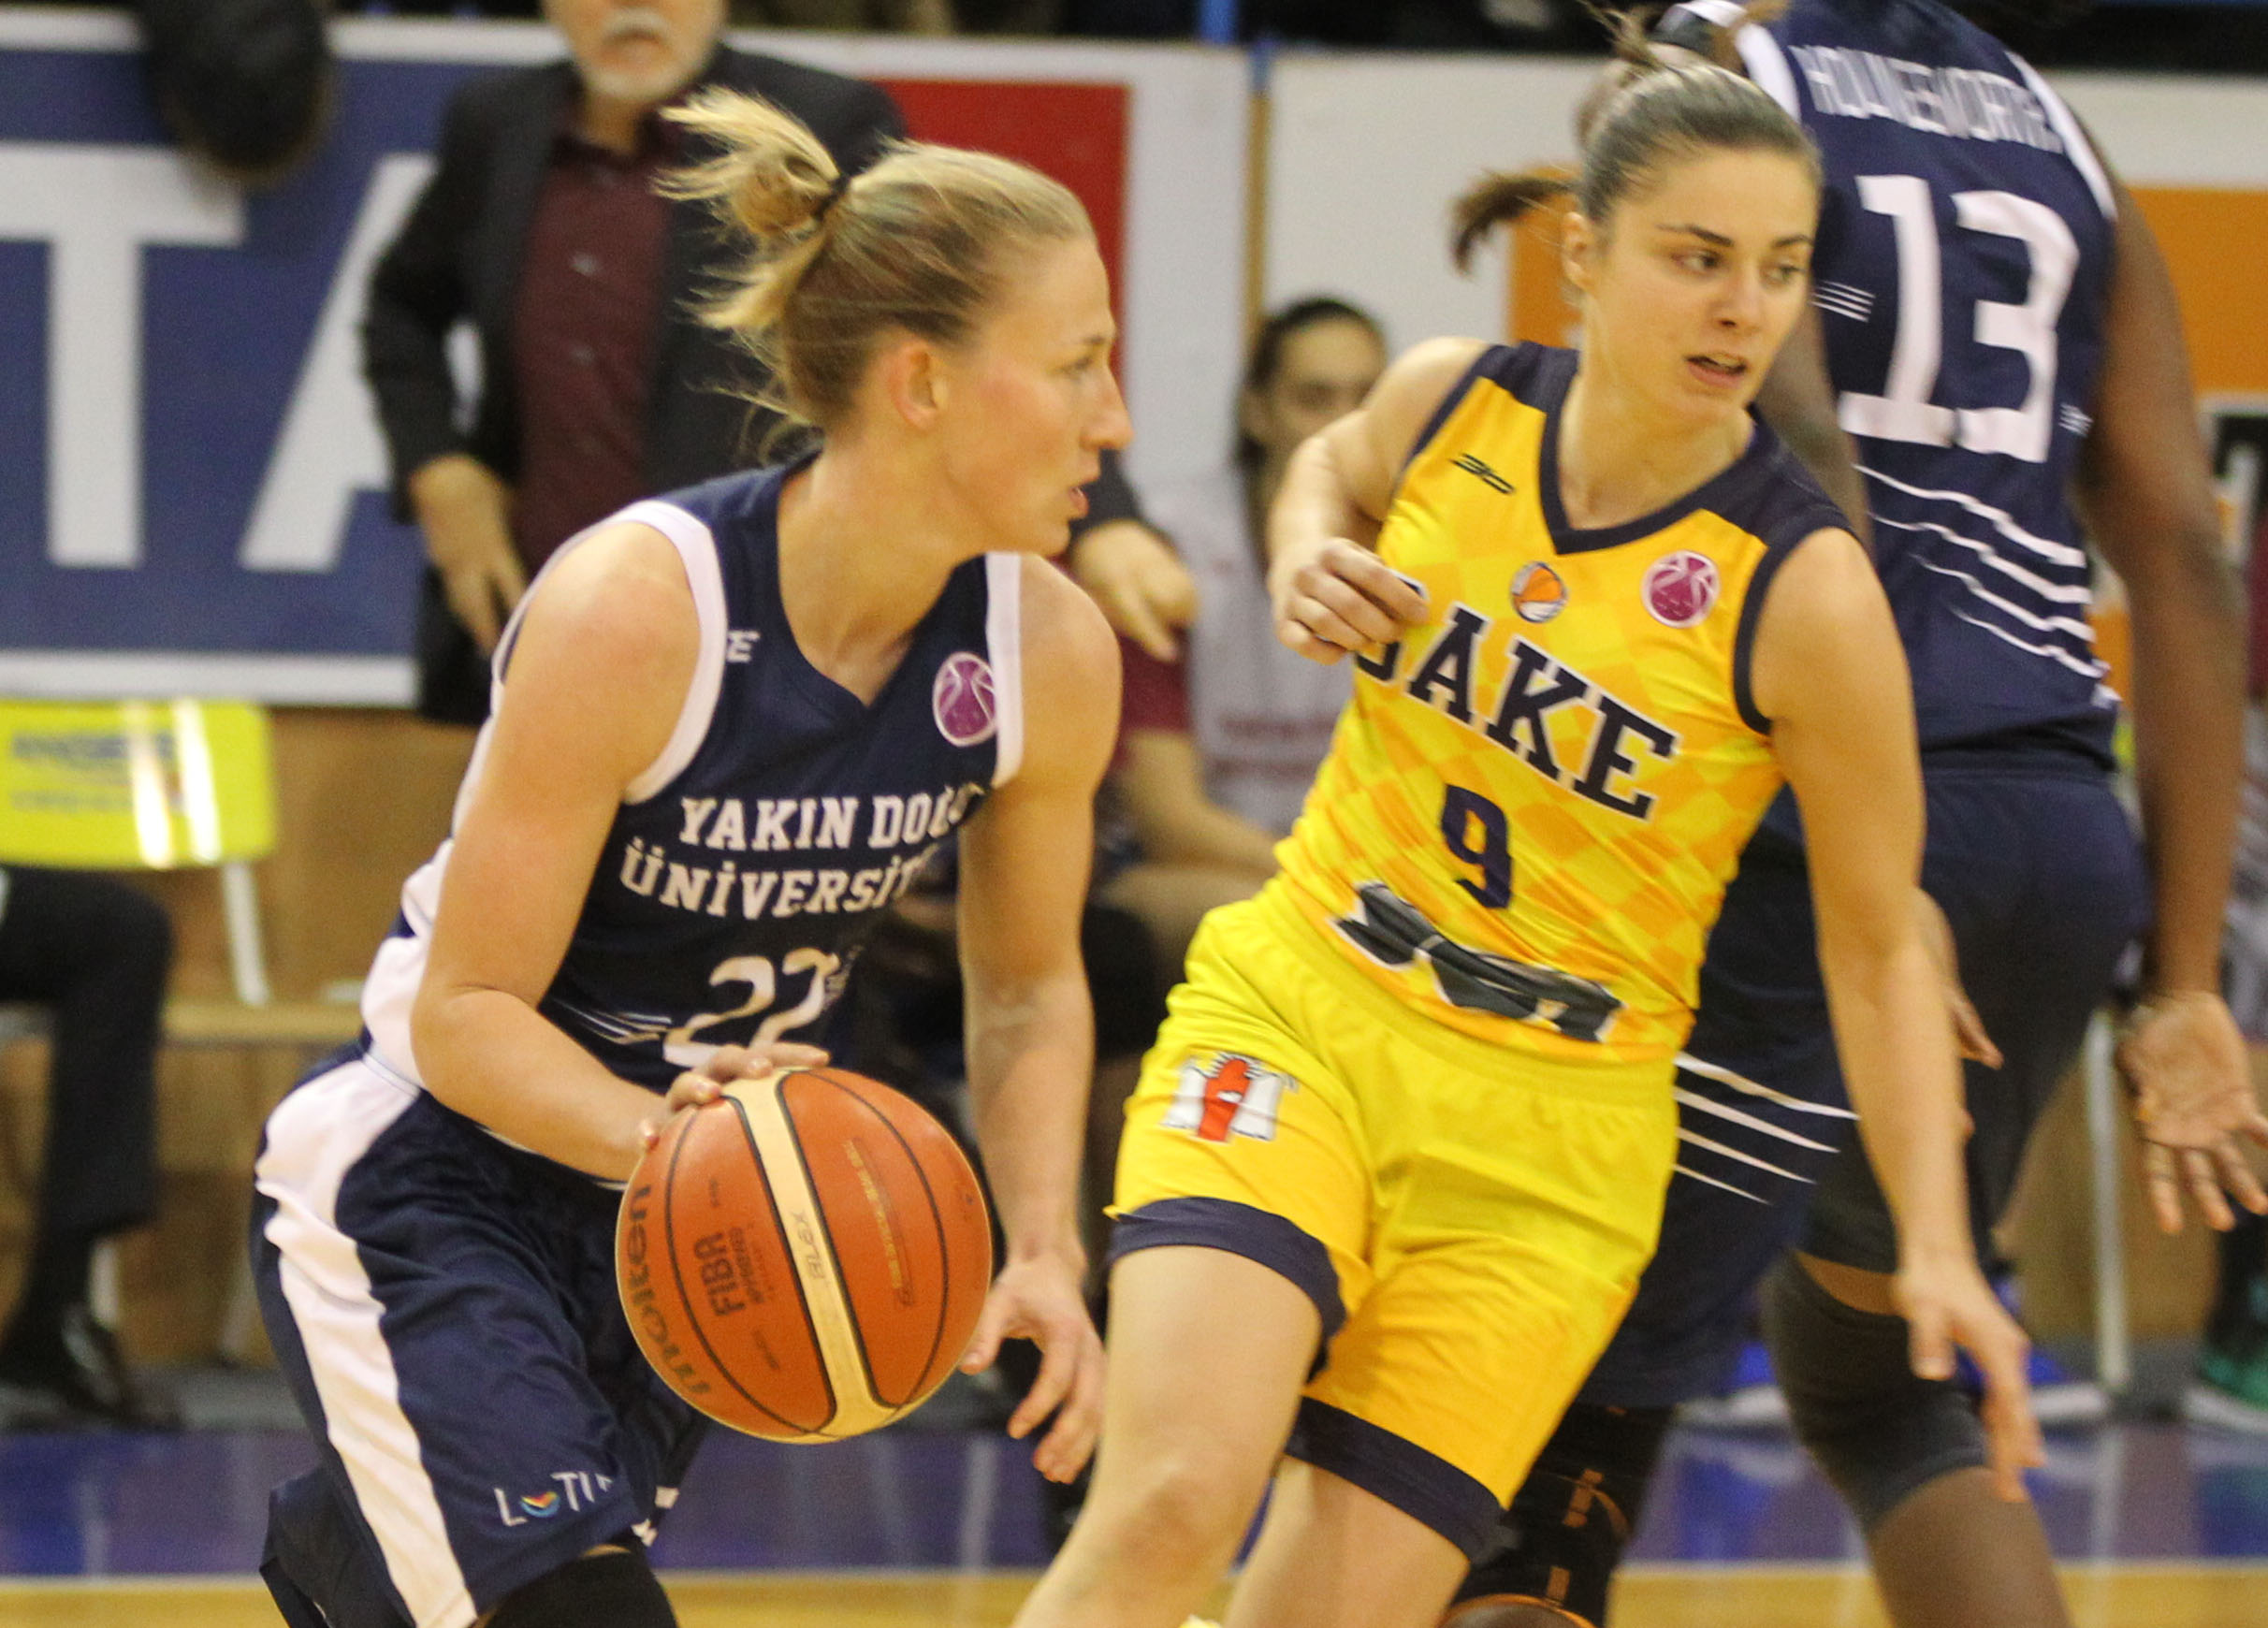 The Near East stands out undefeated in Europe … Good Angels Kosice: 65 – Near East University: 69